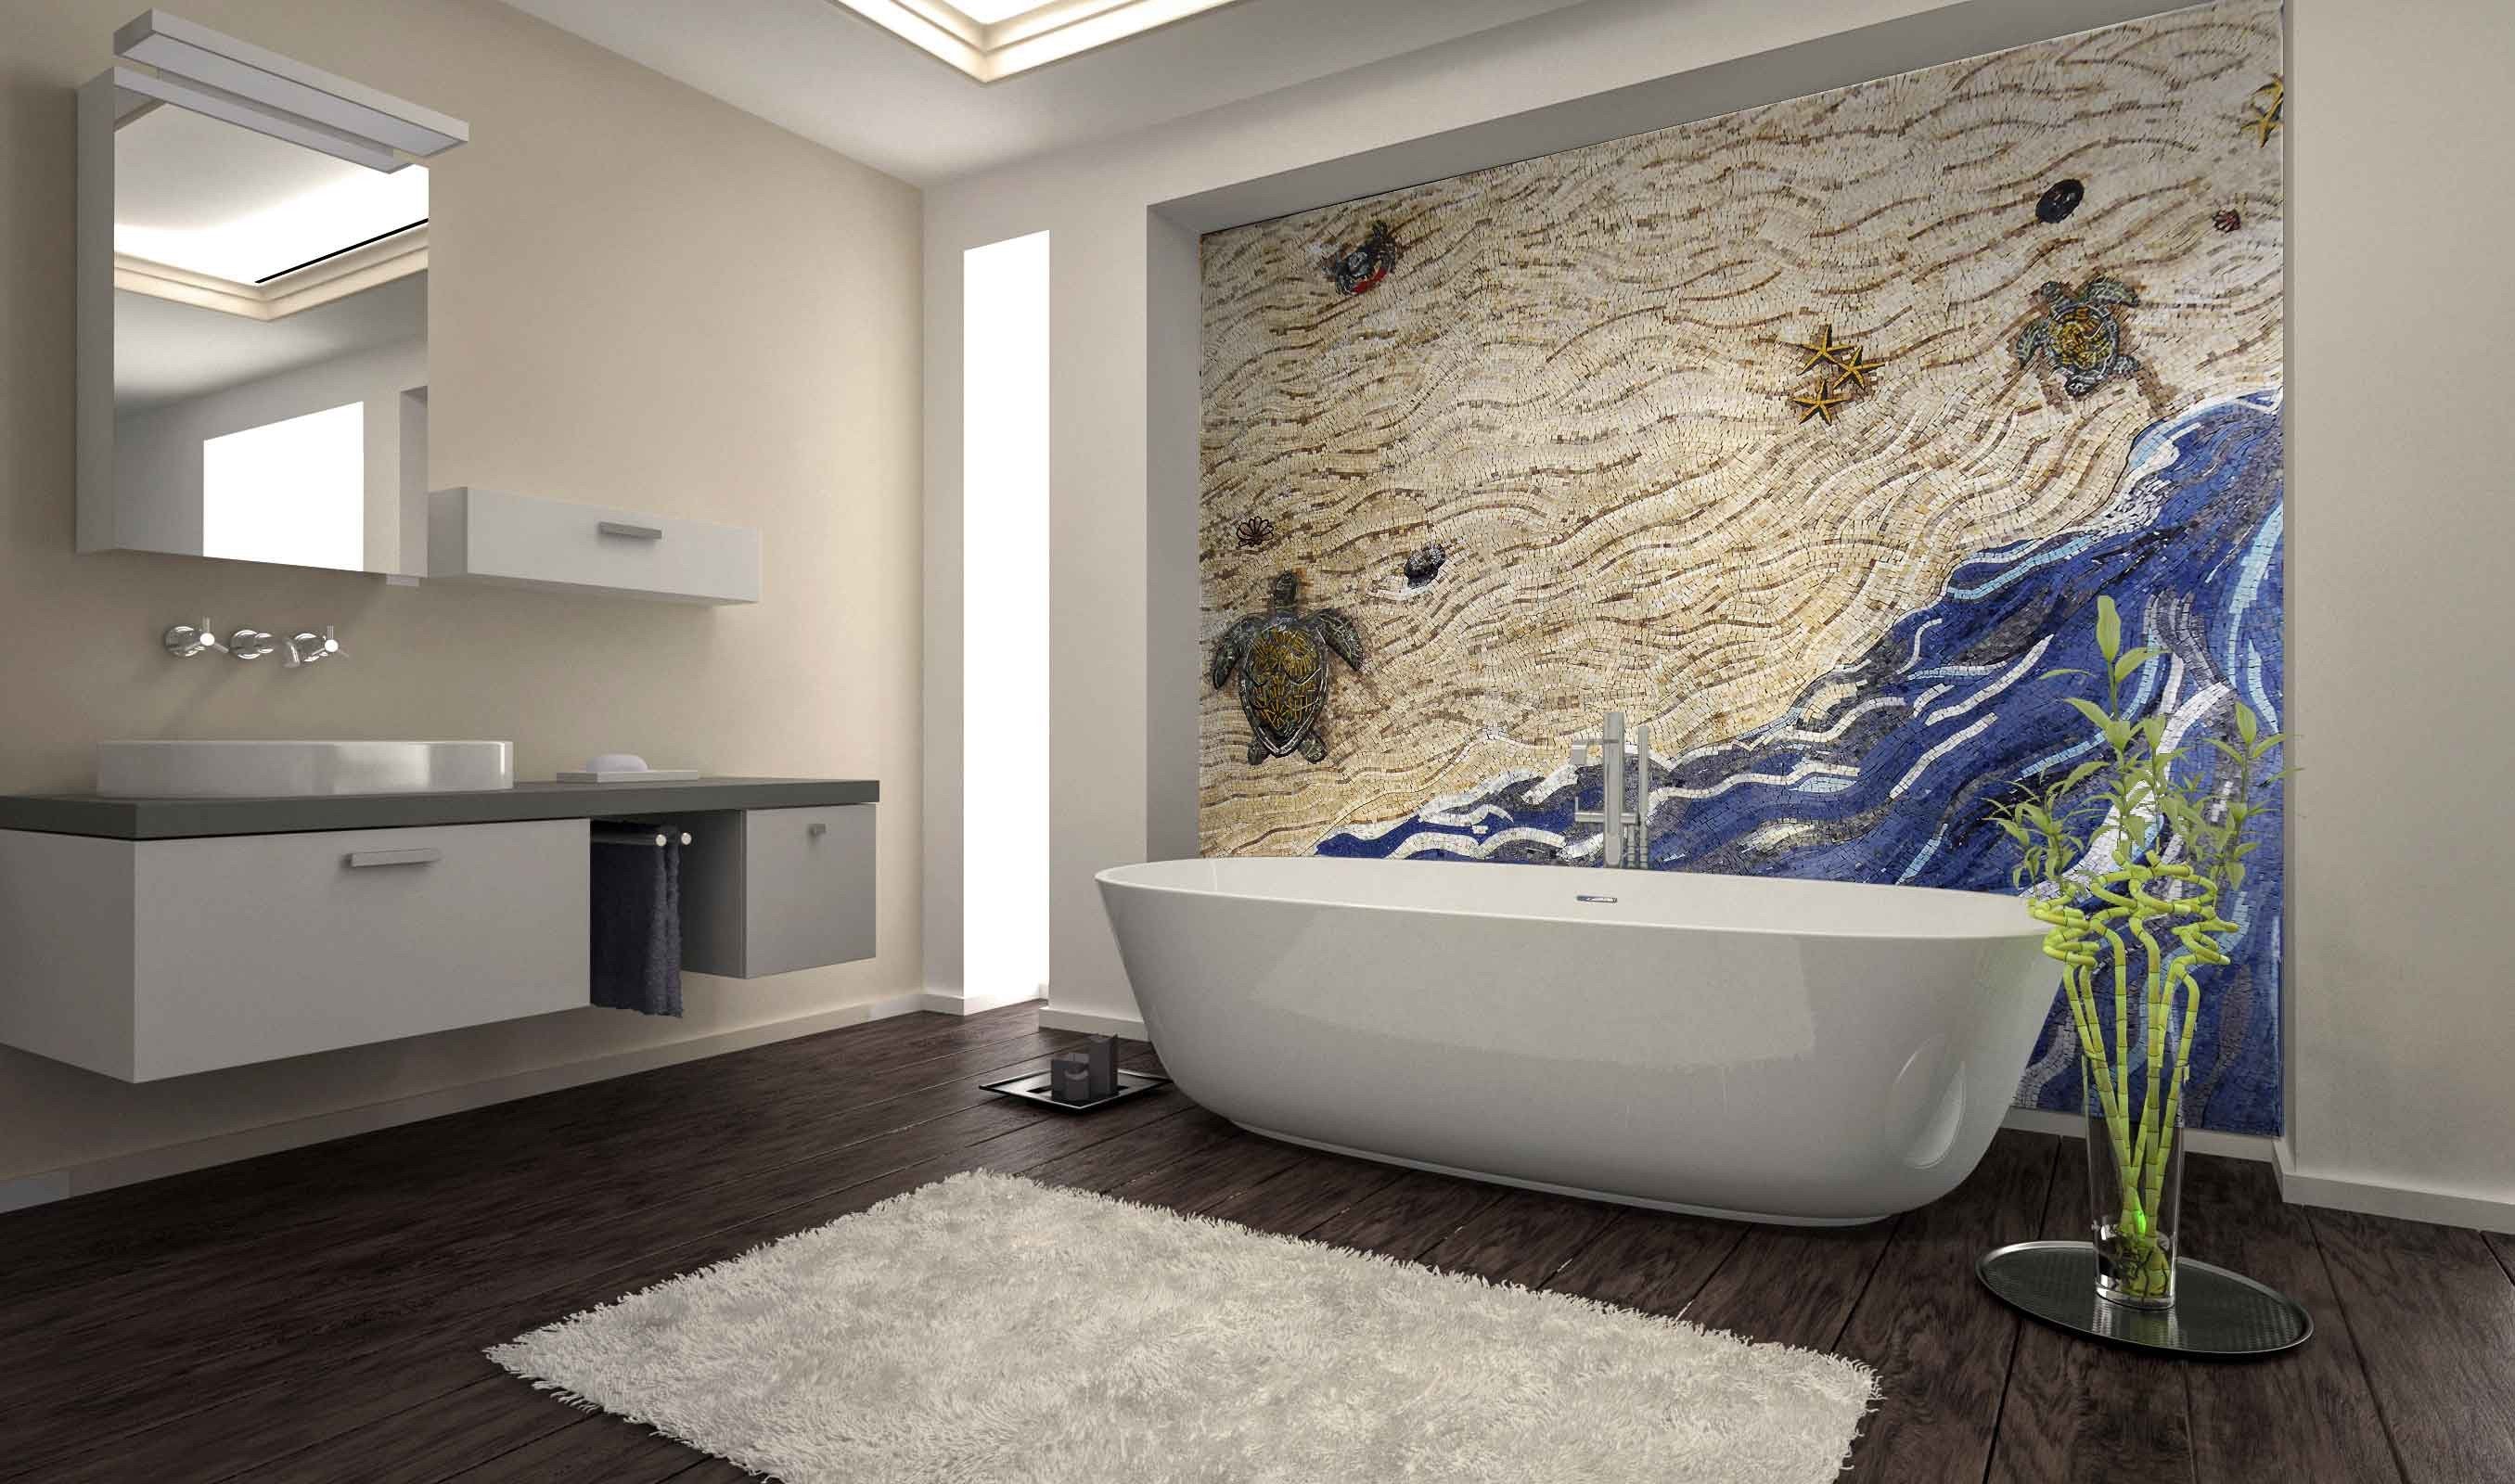 Spa Mosaic Decor Trends: How To Design And Accessorize